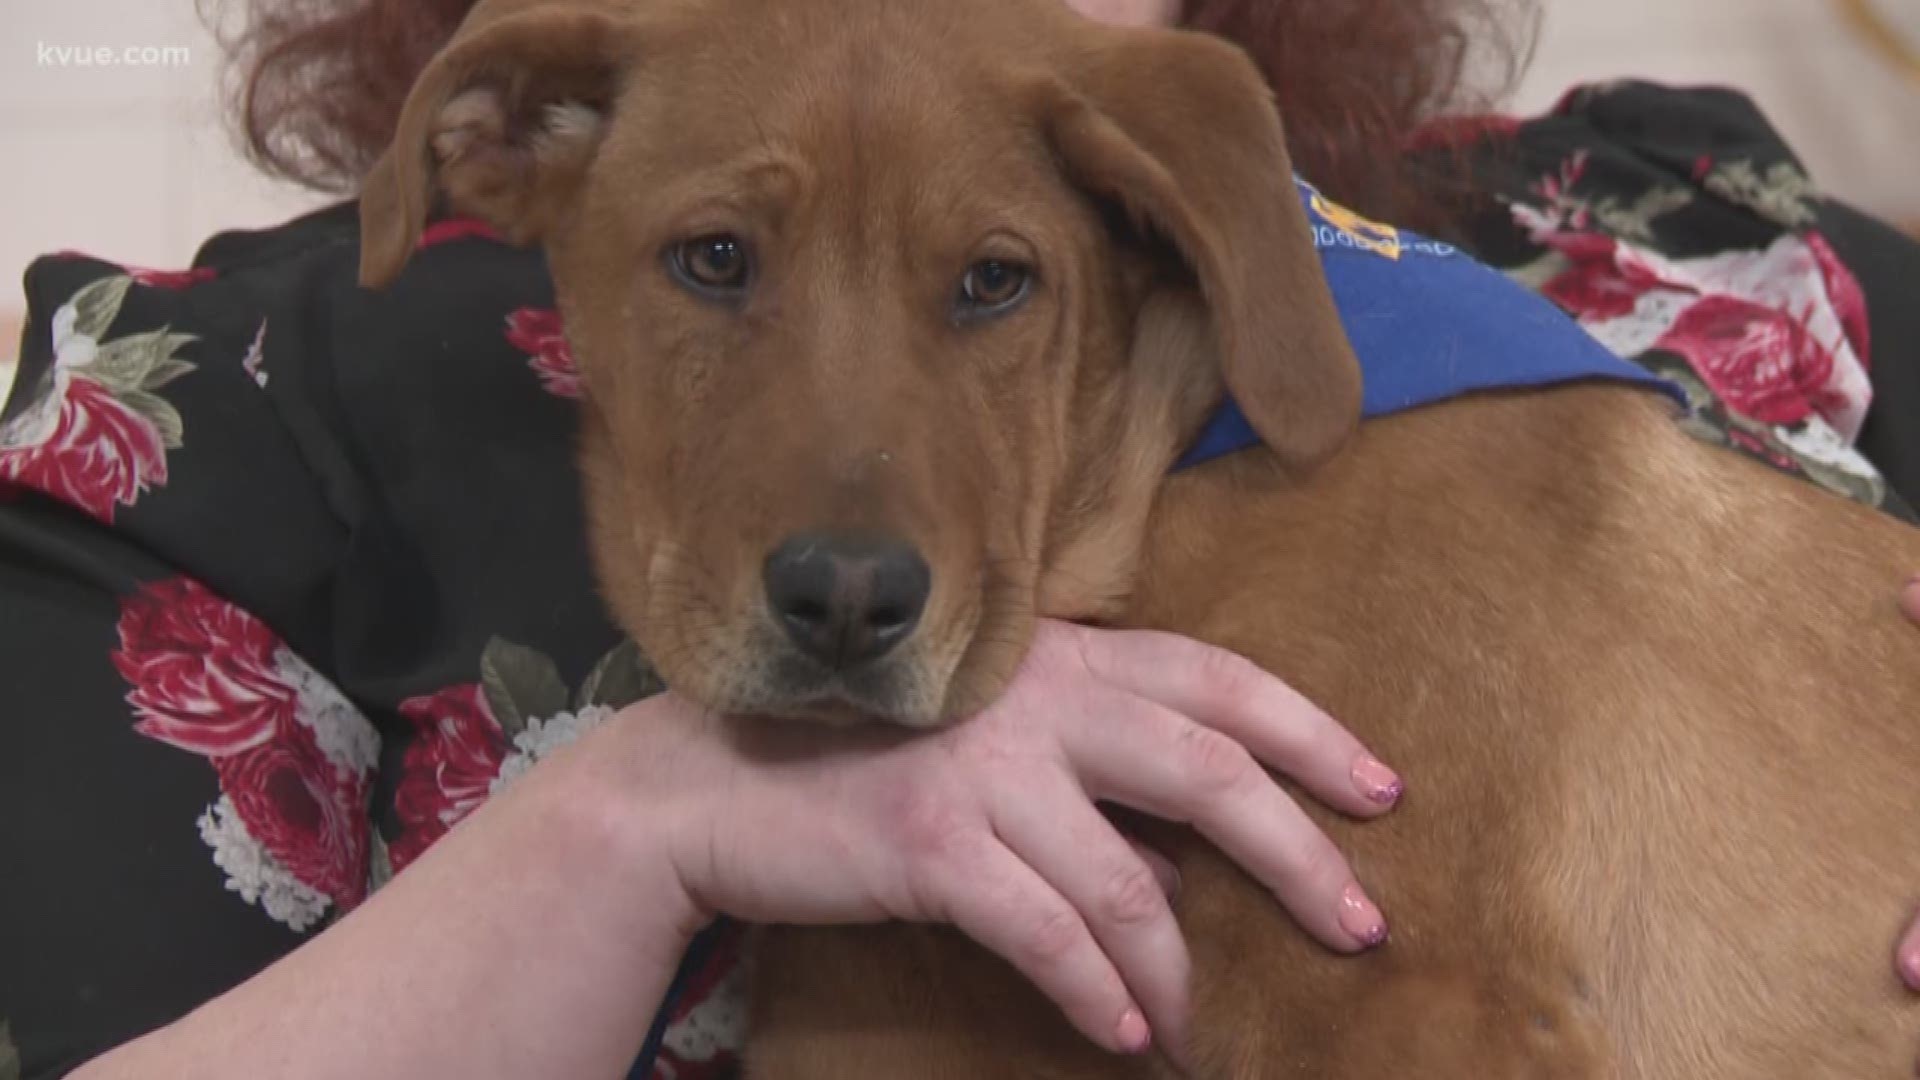 Margaret Smith with Lucky Lab rescue stopped by KVUE to introduce us to Stripes, who is looking for a forever home.